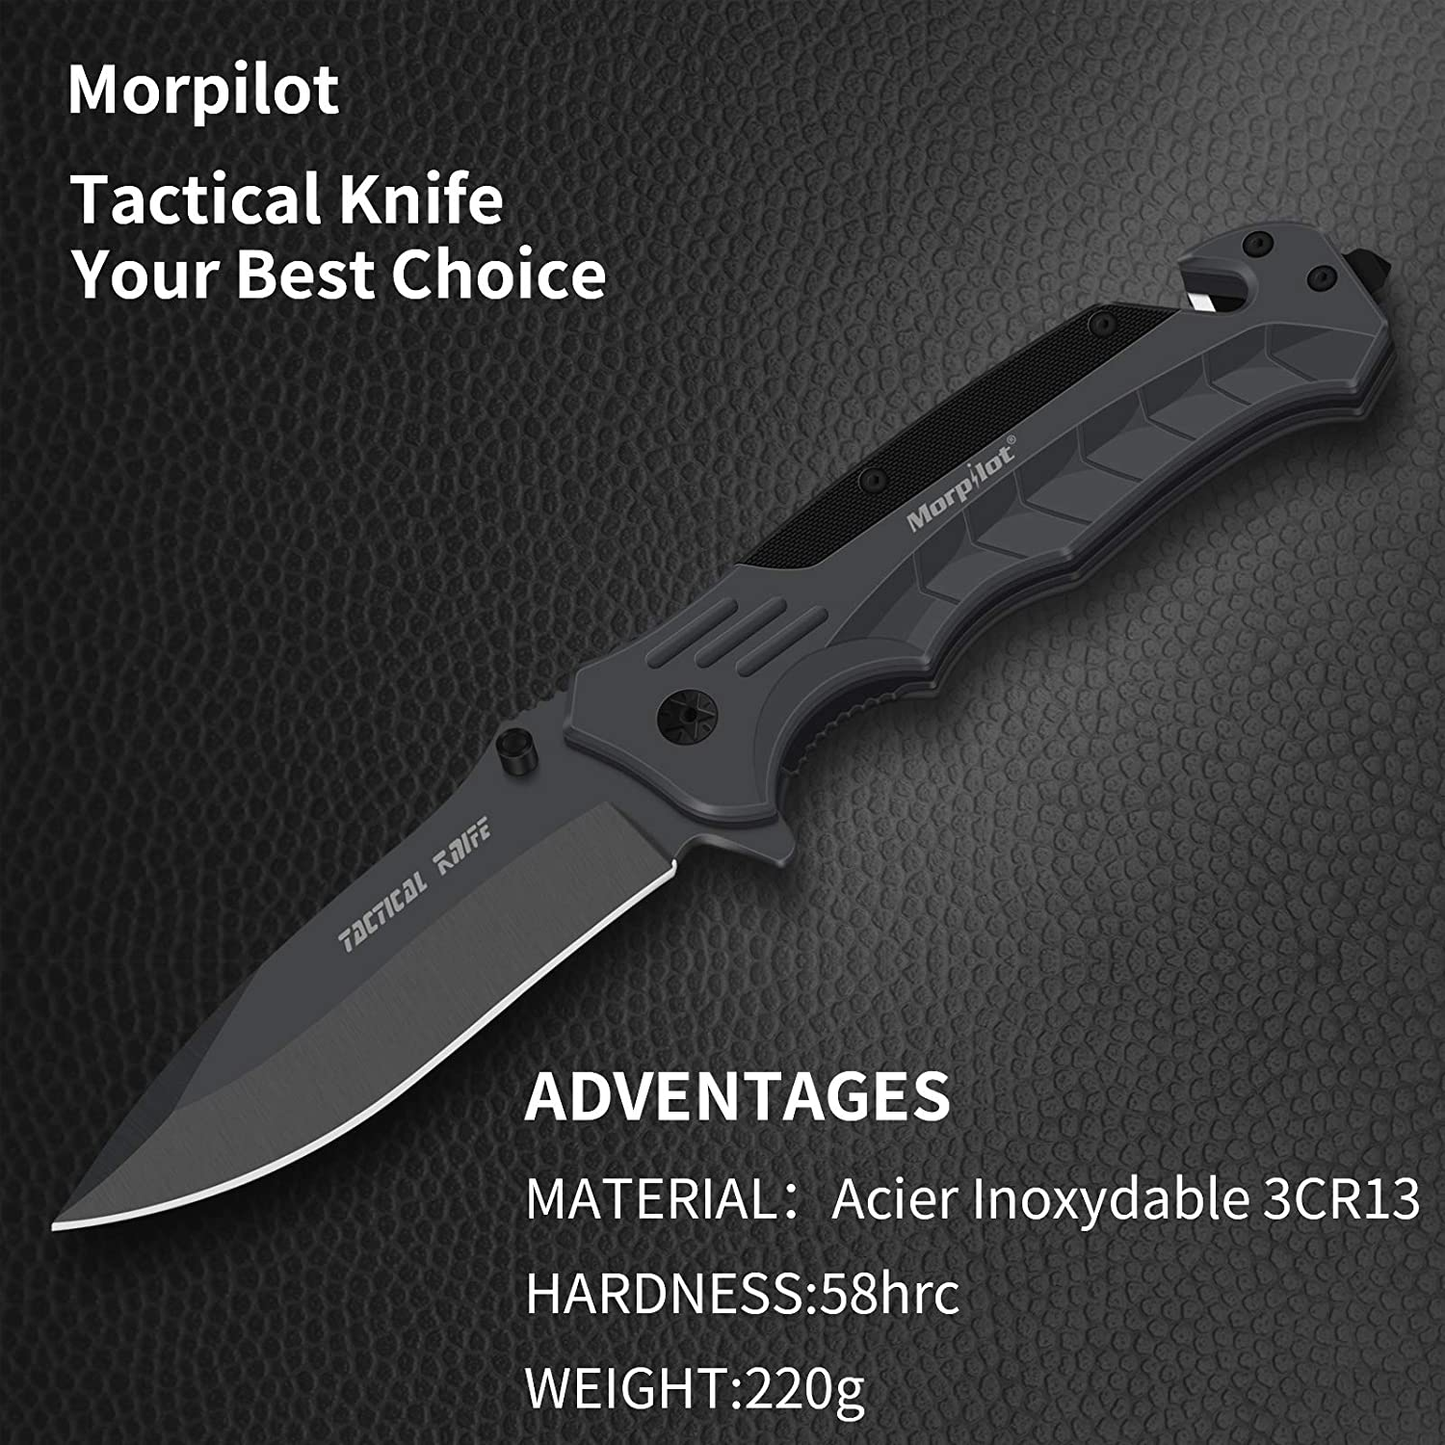 Morpilot Pocket Knife 4 in 1 Folding Knife with Glass Breaker and Cutter Belt, 58HRC Stainless Steel, Quick Release Button Ergonomic Handle Suitable for Camping Picnic Hunting Emergencies Man'S Gift